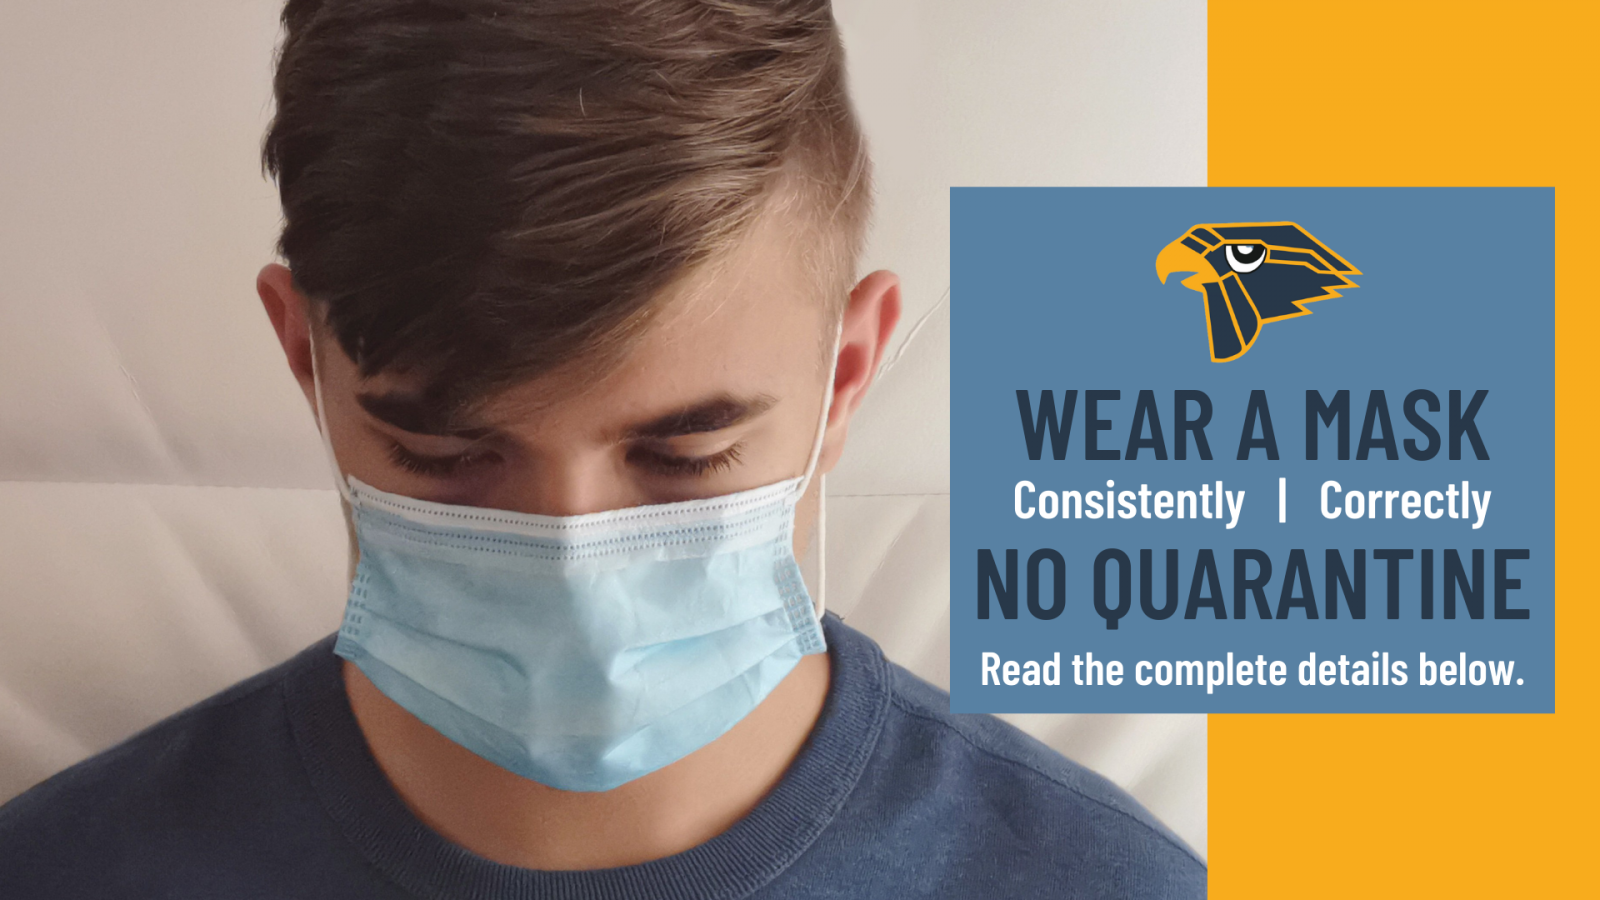 A masked student reads. Text Overlay: "Wear a mask consistently and correctly; no quarantine. Read the complete details below."